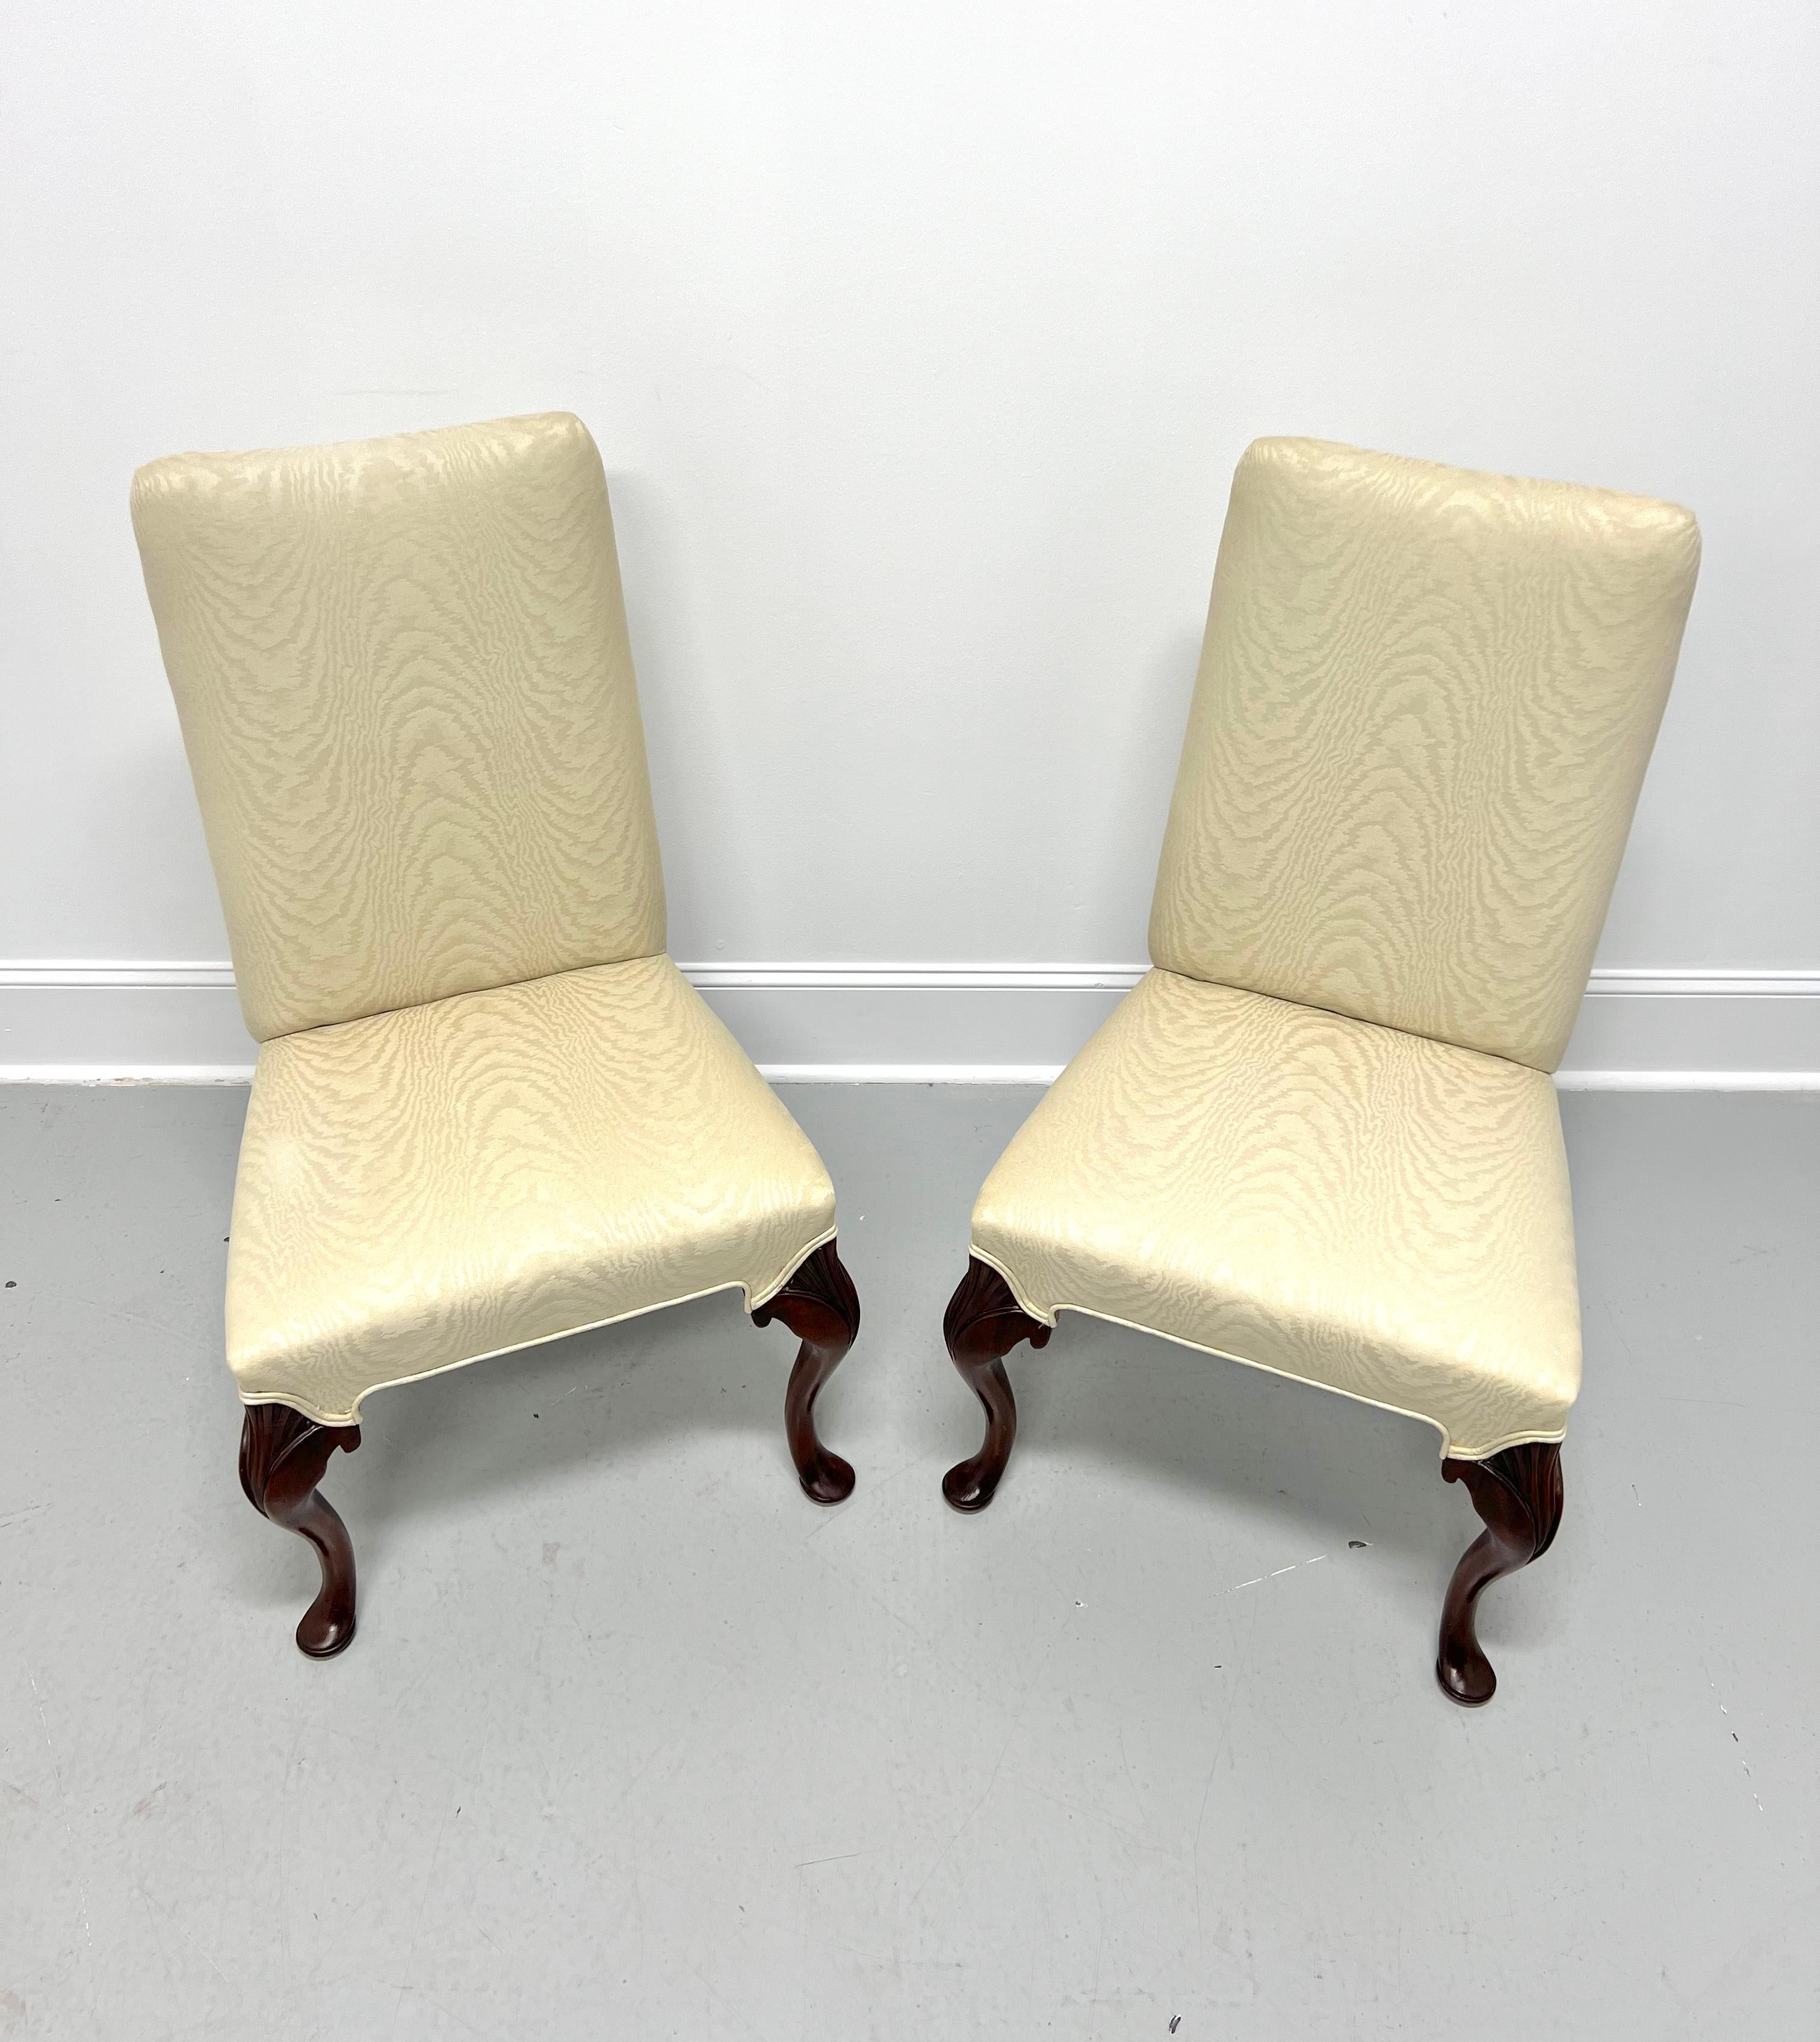 A pair of French Provincial style Parsons chairs, unbranded, similar in quality to Hickory Chair or John Widdicomb. Mahogany frames with high backs, carved knees, cabriole legs, and pad feet. Upholstered in a cream color flame pattern fabric. Likely